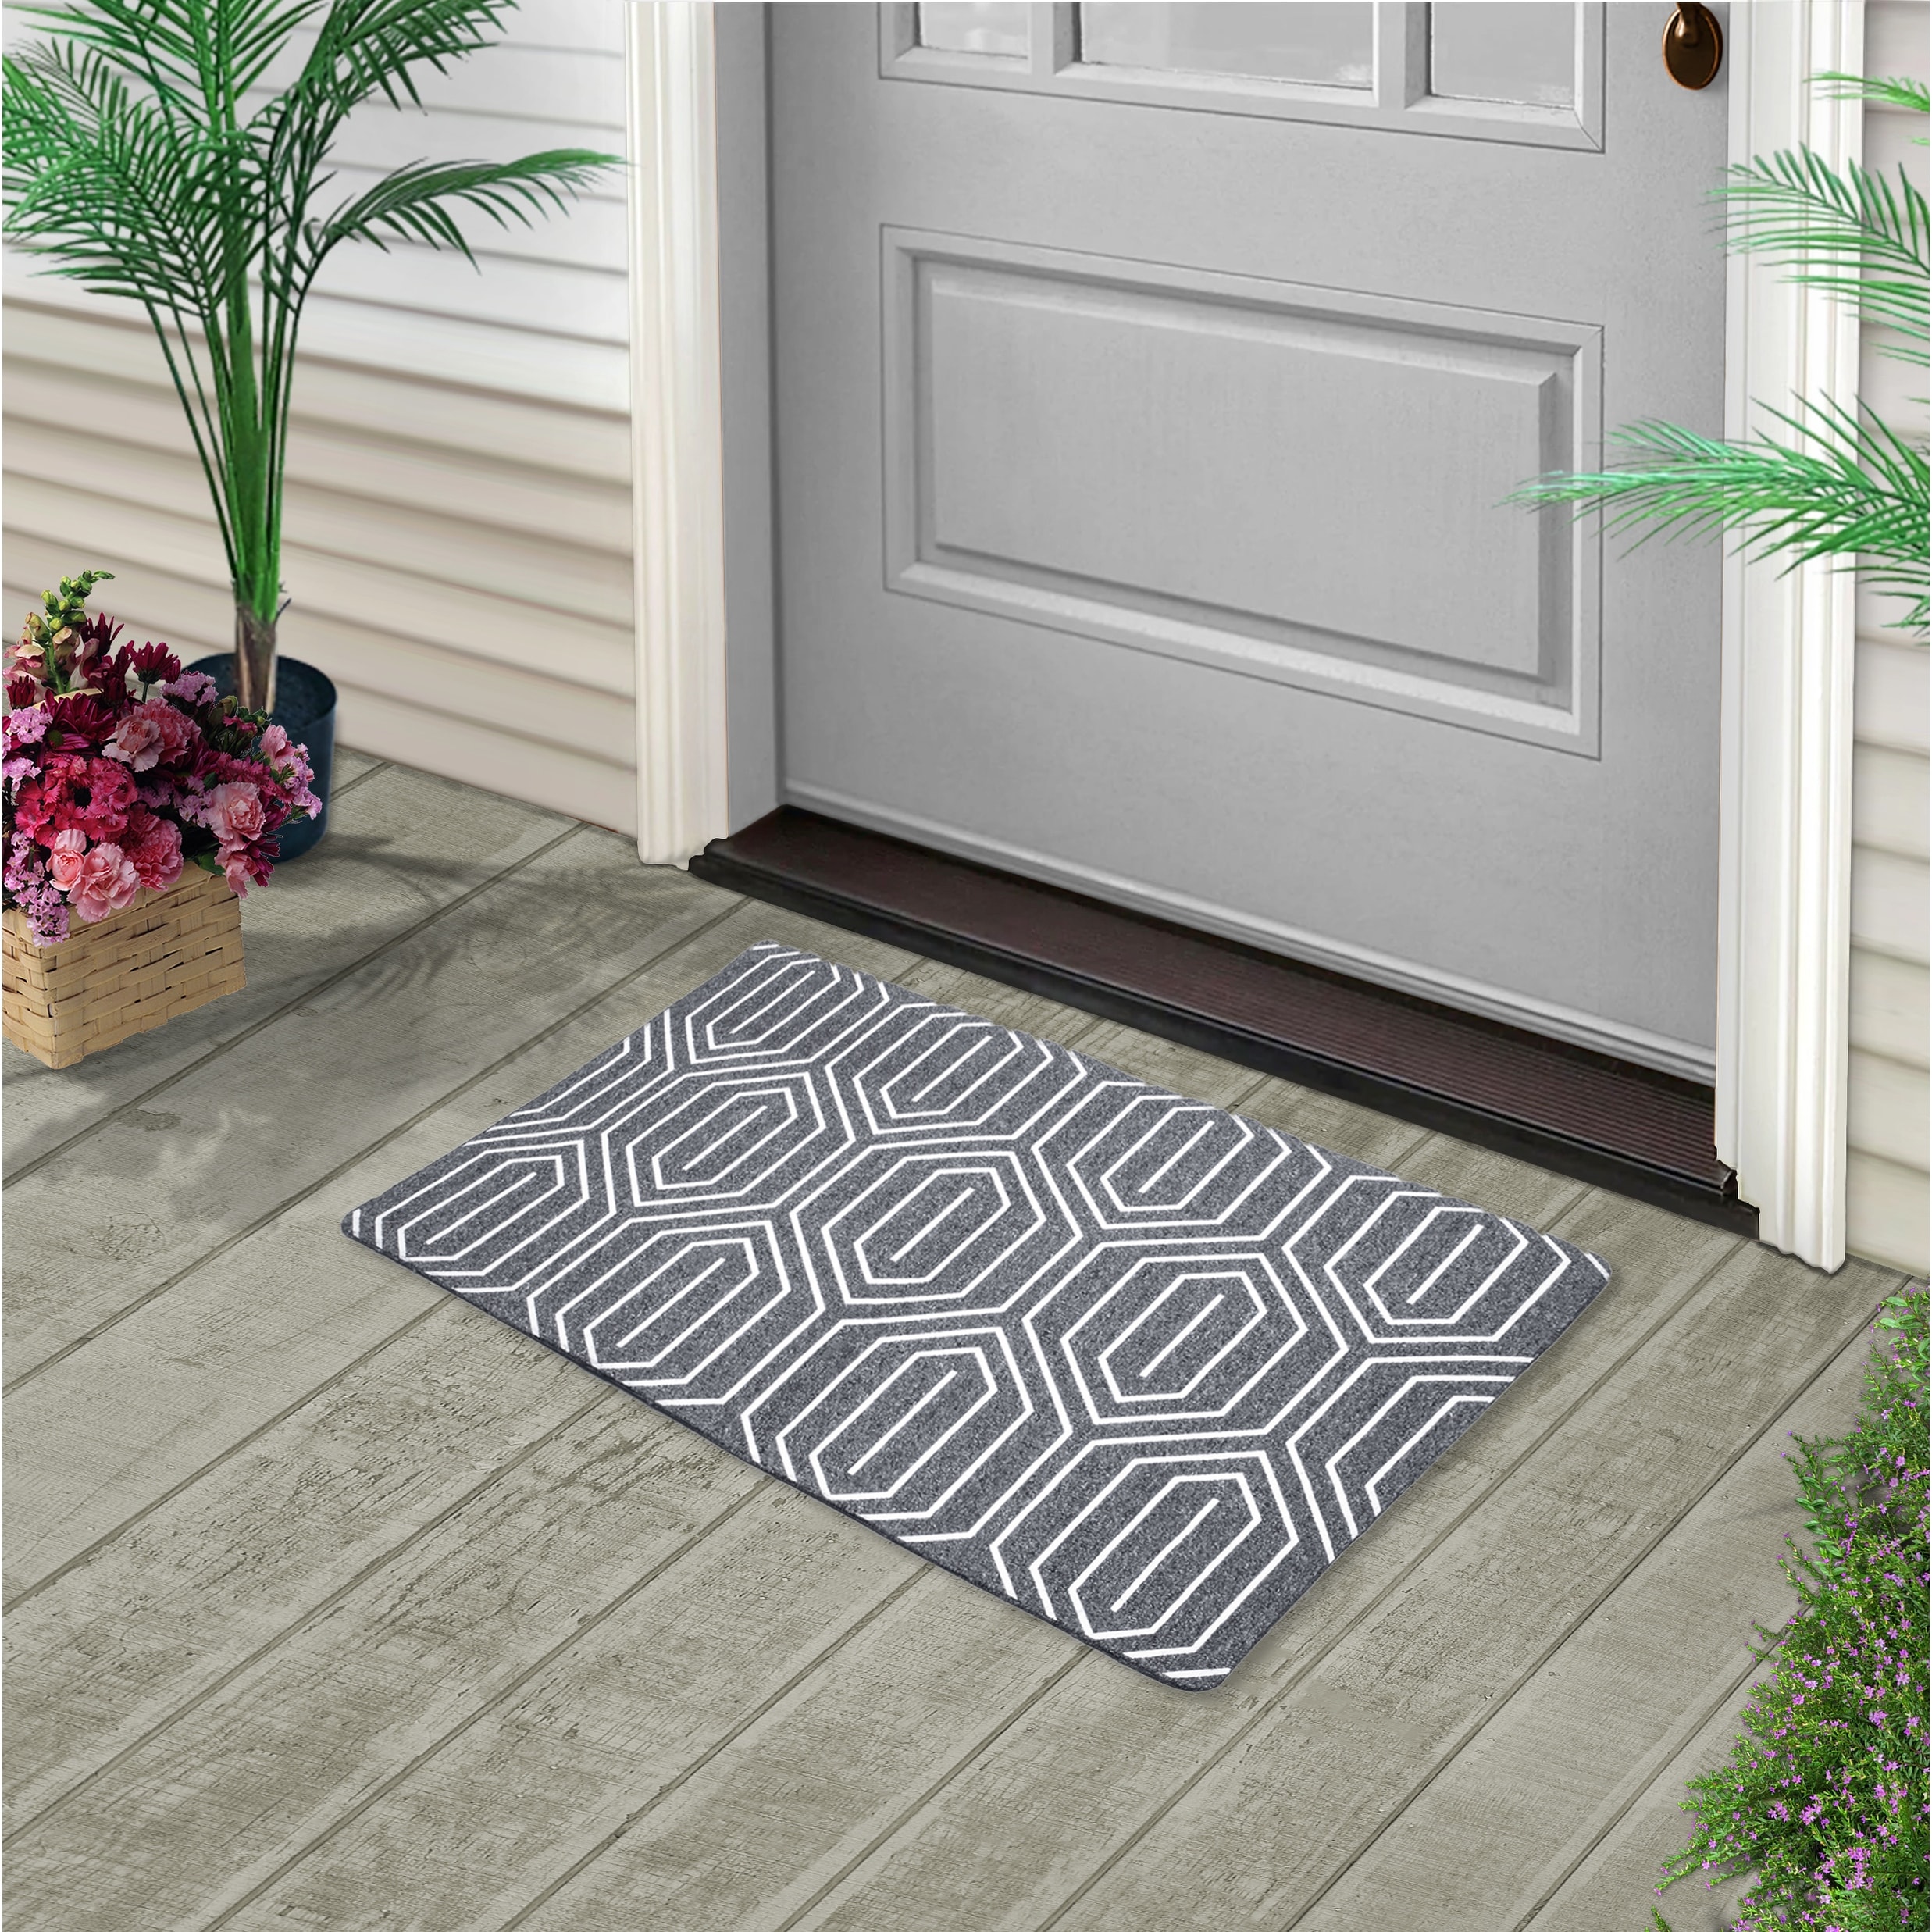 https://ak1.ostkcdn.com/images/products/is/images/direct/4ad8959641d58fc958c873c1feae3916bbcc6f8c/Mascot-Hardware-Door-Mat-Rubber-Backing-Non-Slip-Door-Mats-30inx18in-Absorbent-Resist-Dirt-Entryway-Washable.jpg